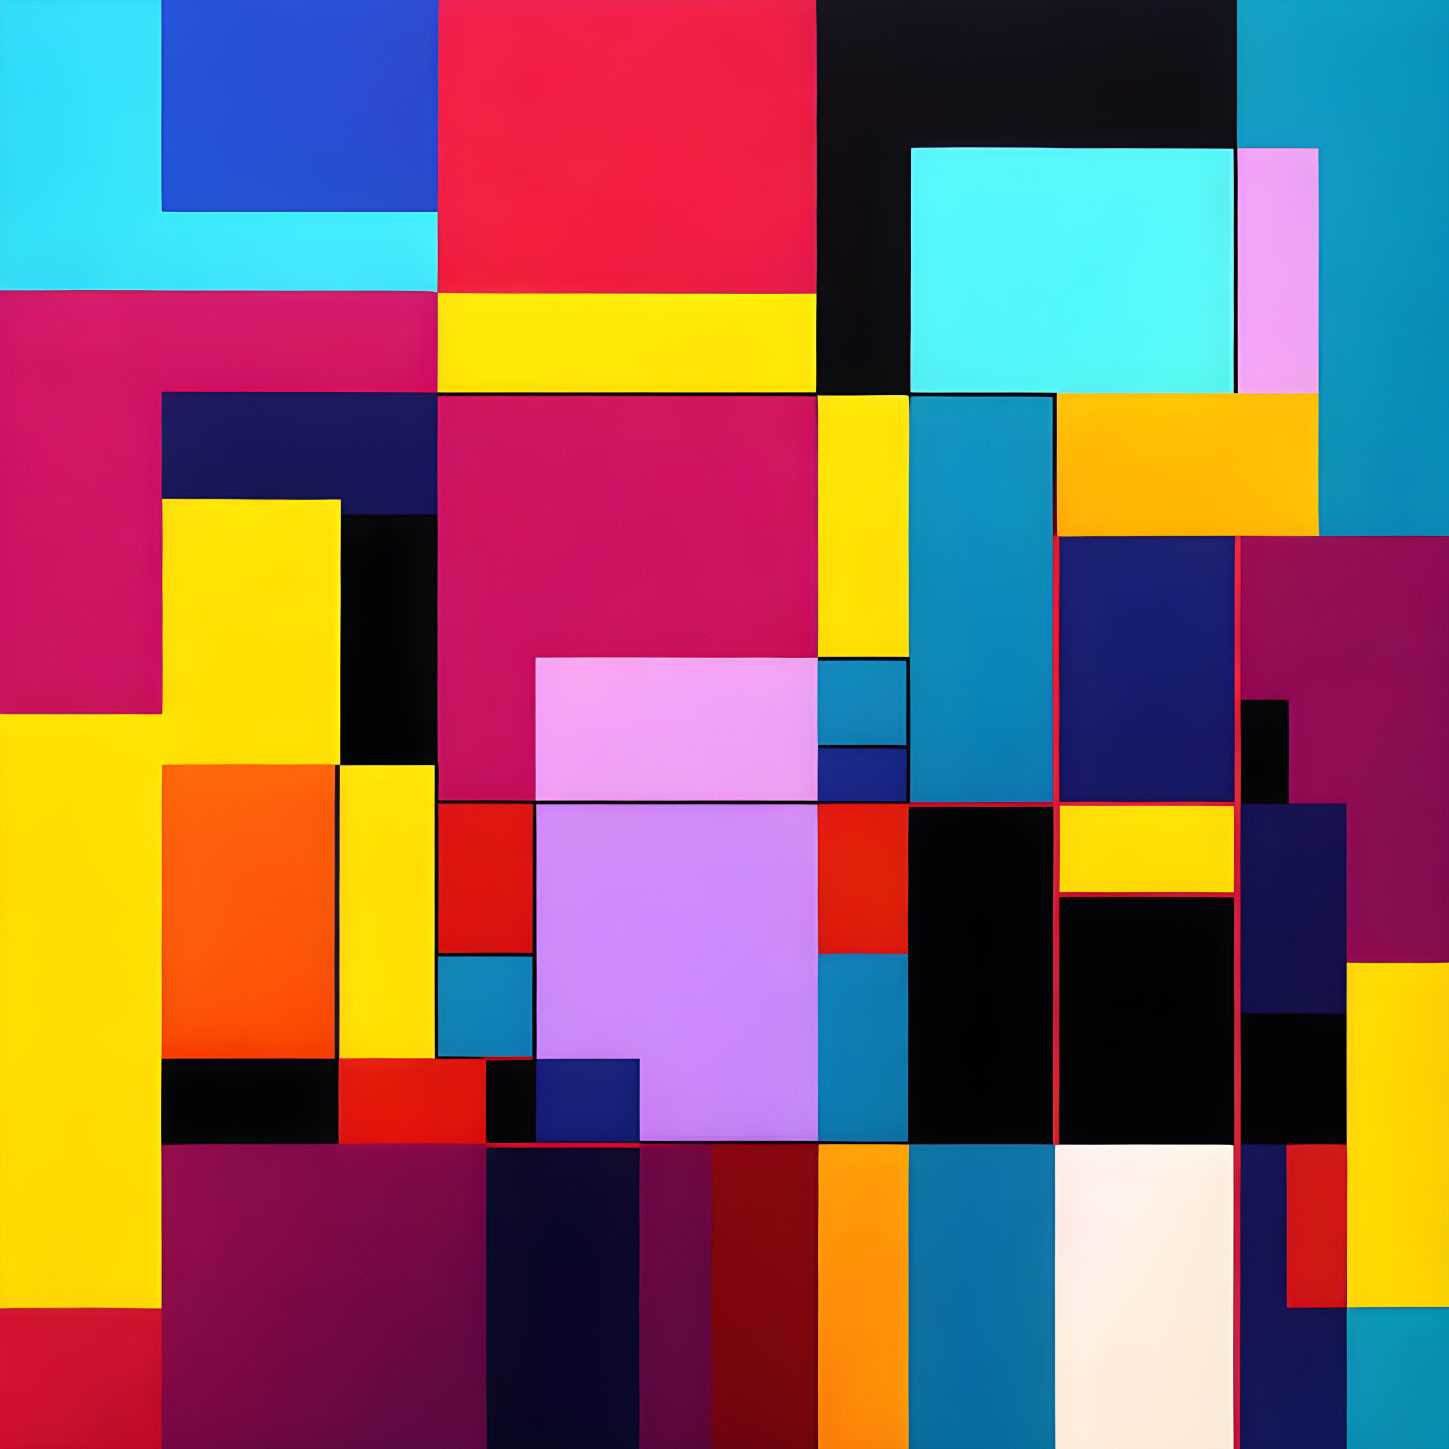 Colorful Geometric Abstract Painting with Squares and Rectangles in Blue, Red, Purple, Yellow